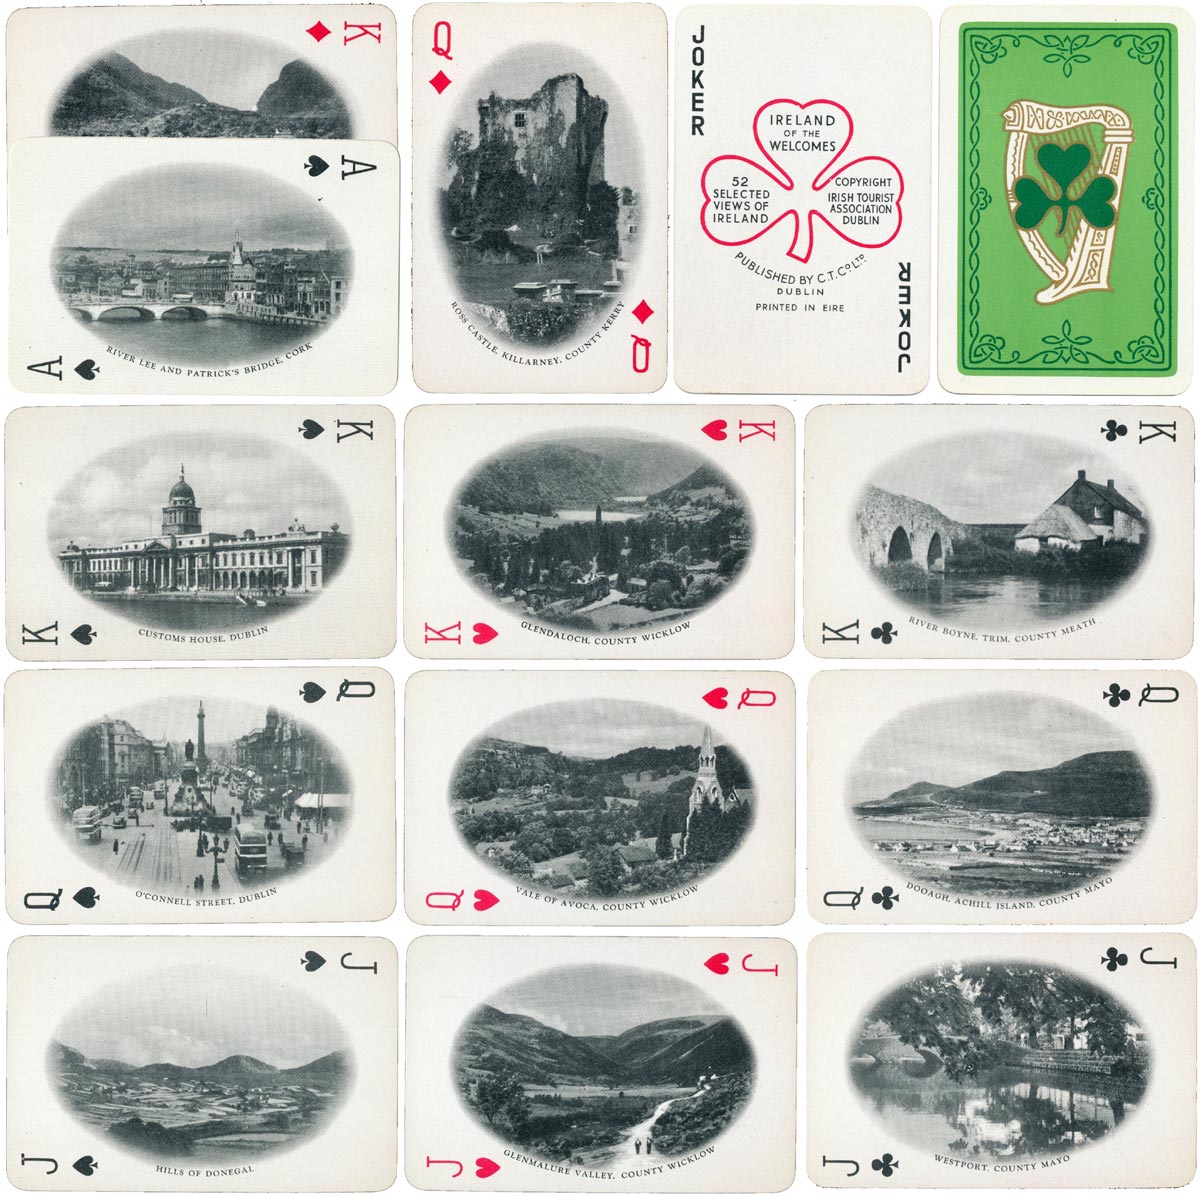 Selected views of Ireland Souvenir playing cards published by the Irish Tourist Association, early 1950s